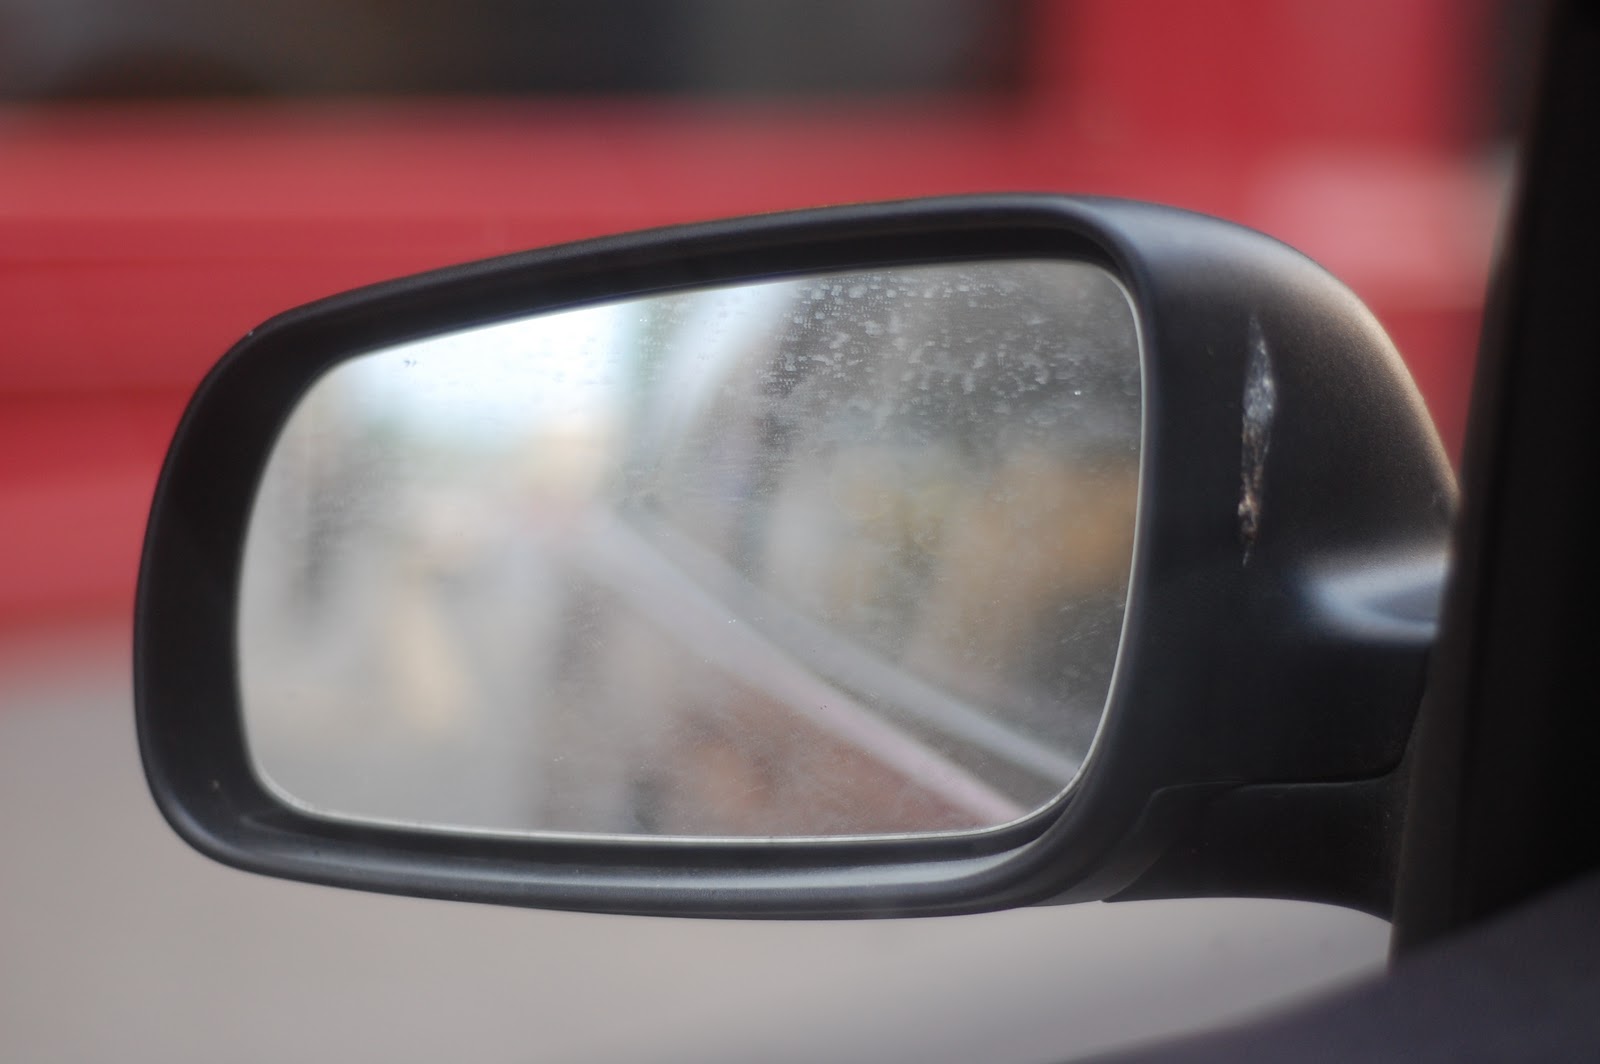 Be aware of your blind spots and consider investing in a backup camera to drive more safely